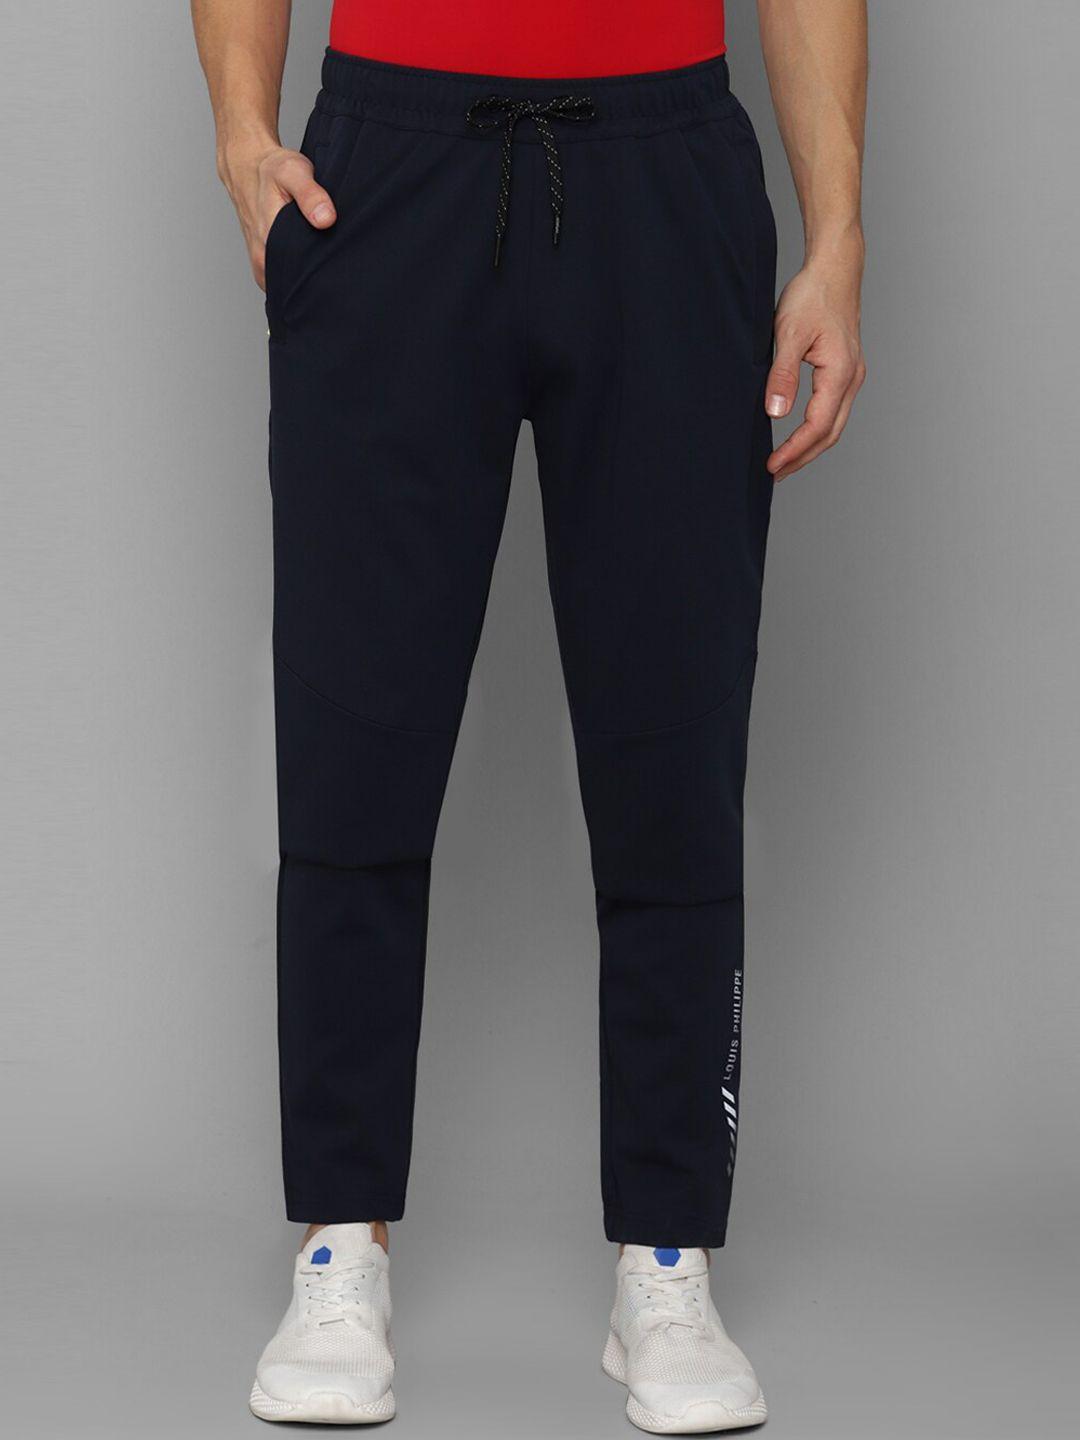 louis philippe men navy blue solid track pants